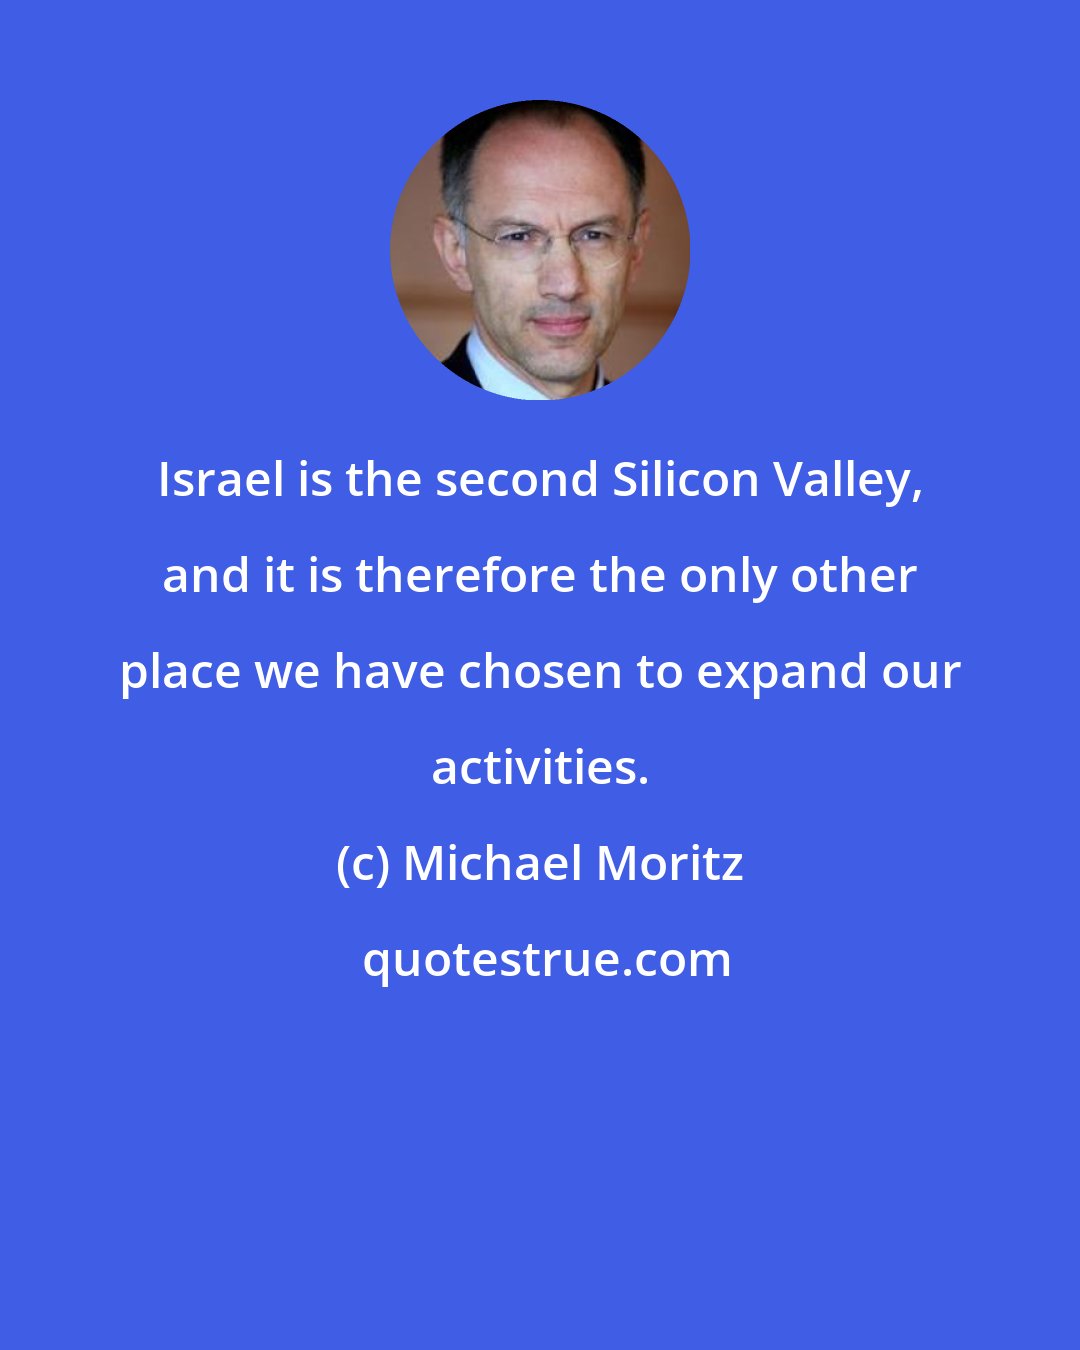 Michael Moritz: Israel is the second Silicon Valley, and it is therefore the only other place we have chosen to expand our activities.